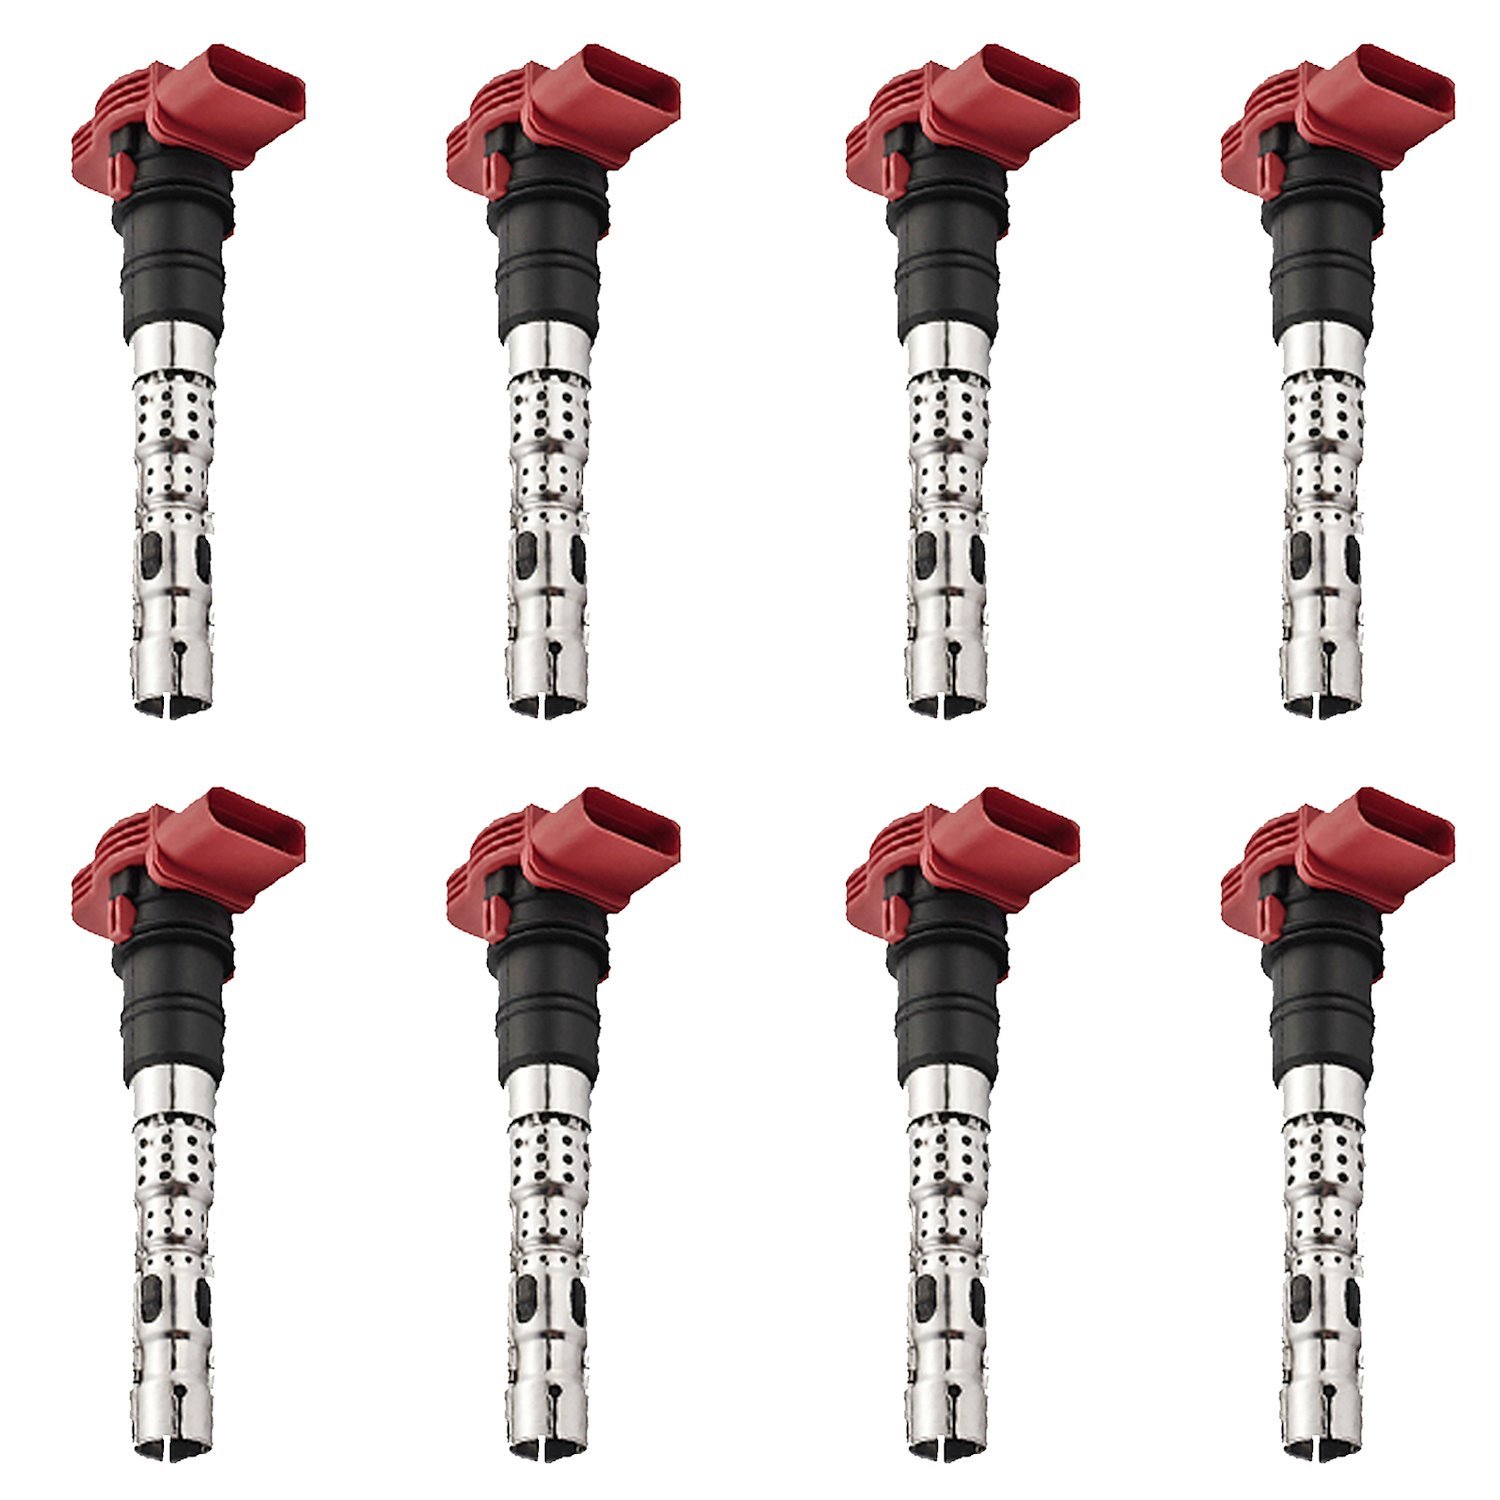 OE Replacement Ignition Coils for Audi A6 A8 S4 Allroad Quattro 4.2L